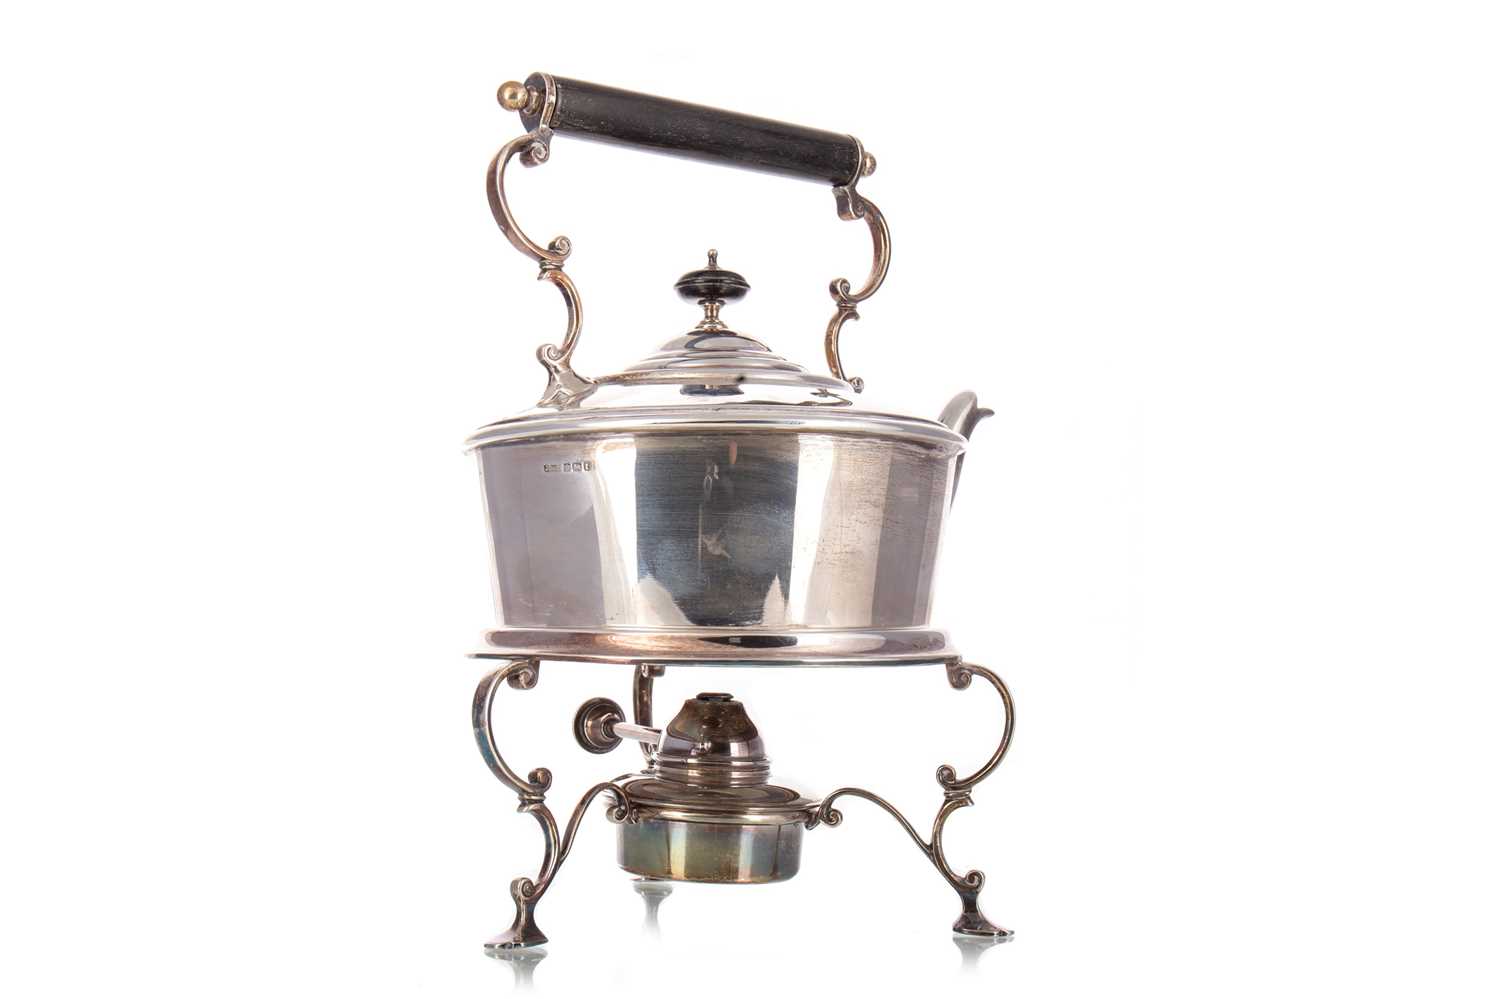 Lot 55 - GEORGE VI SILVER KETTLE ON STAND